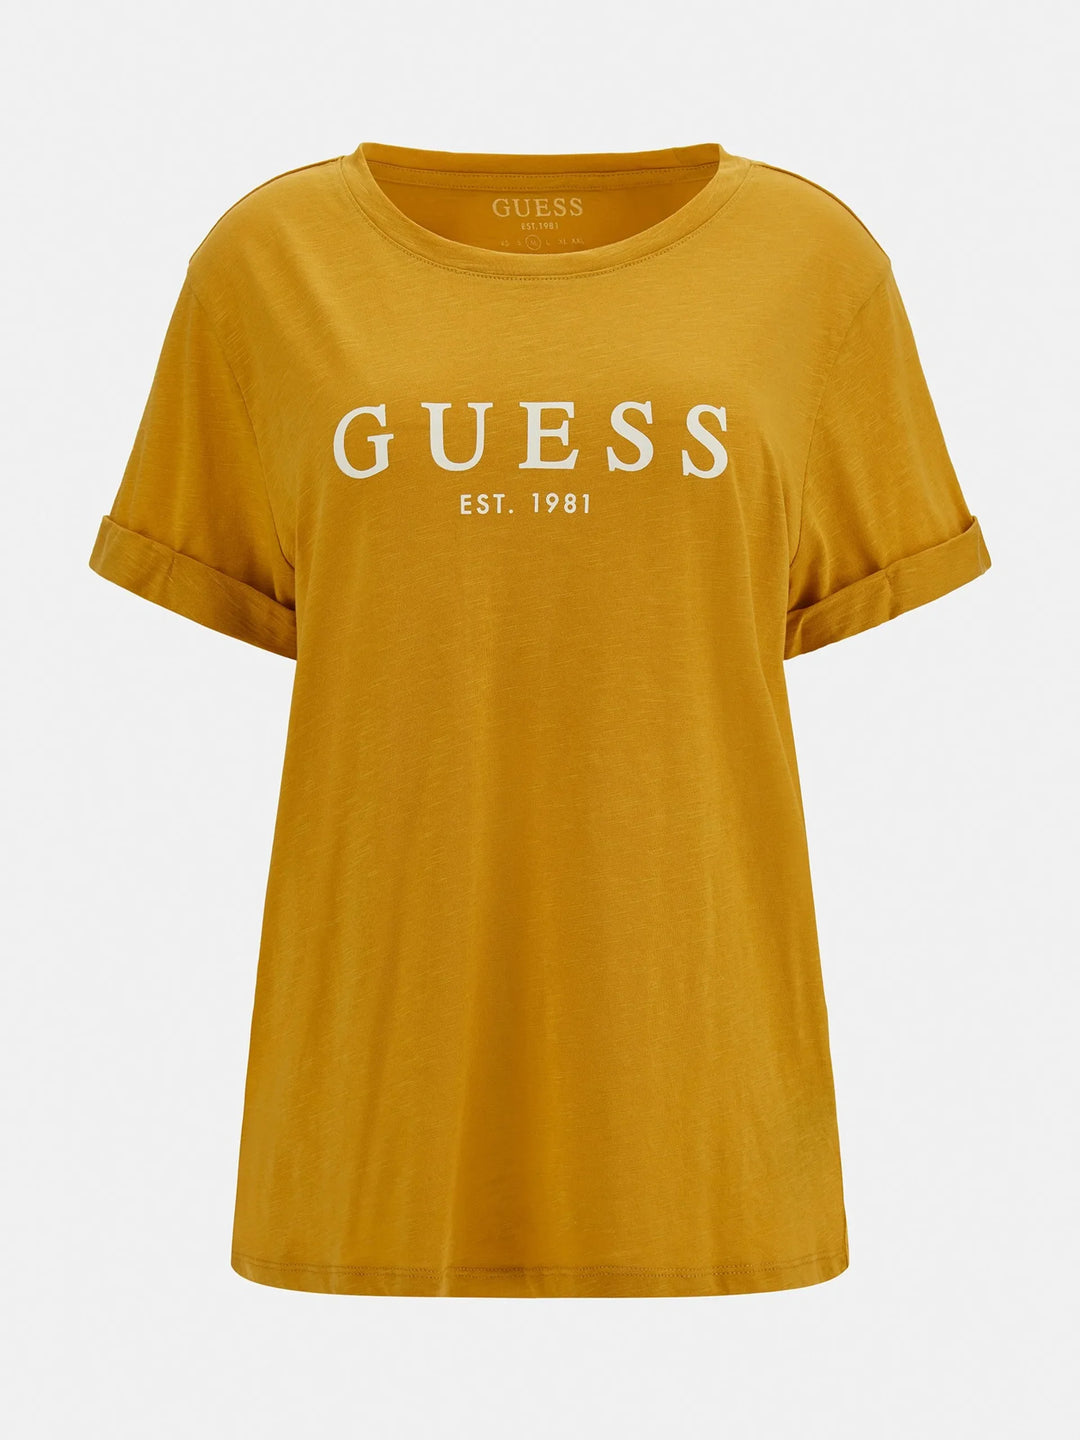 1981 ROLLED CUFF LOGO TEE - Guess